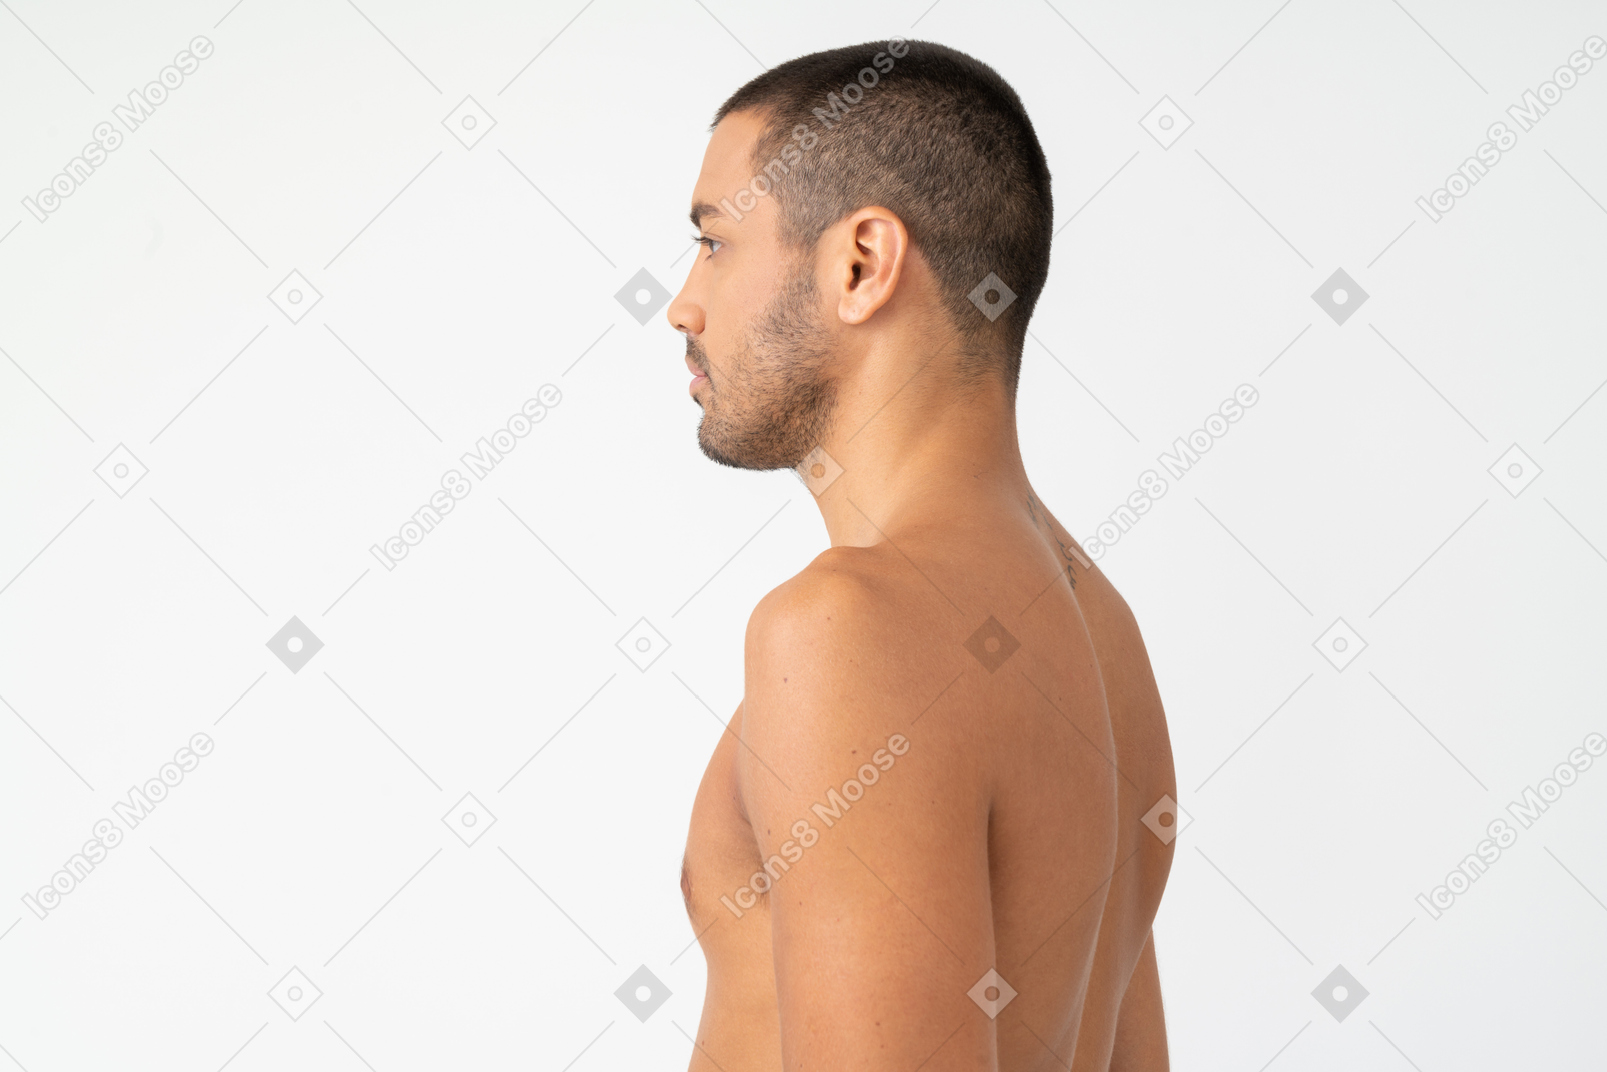 Barechested young man standing in profile